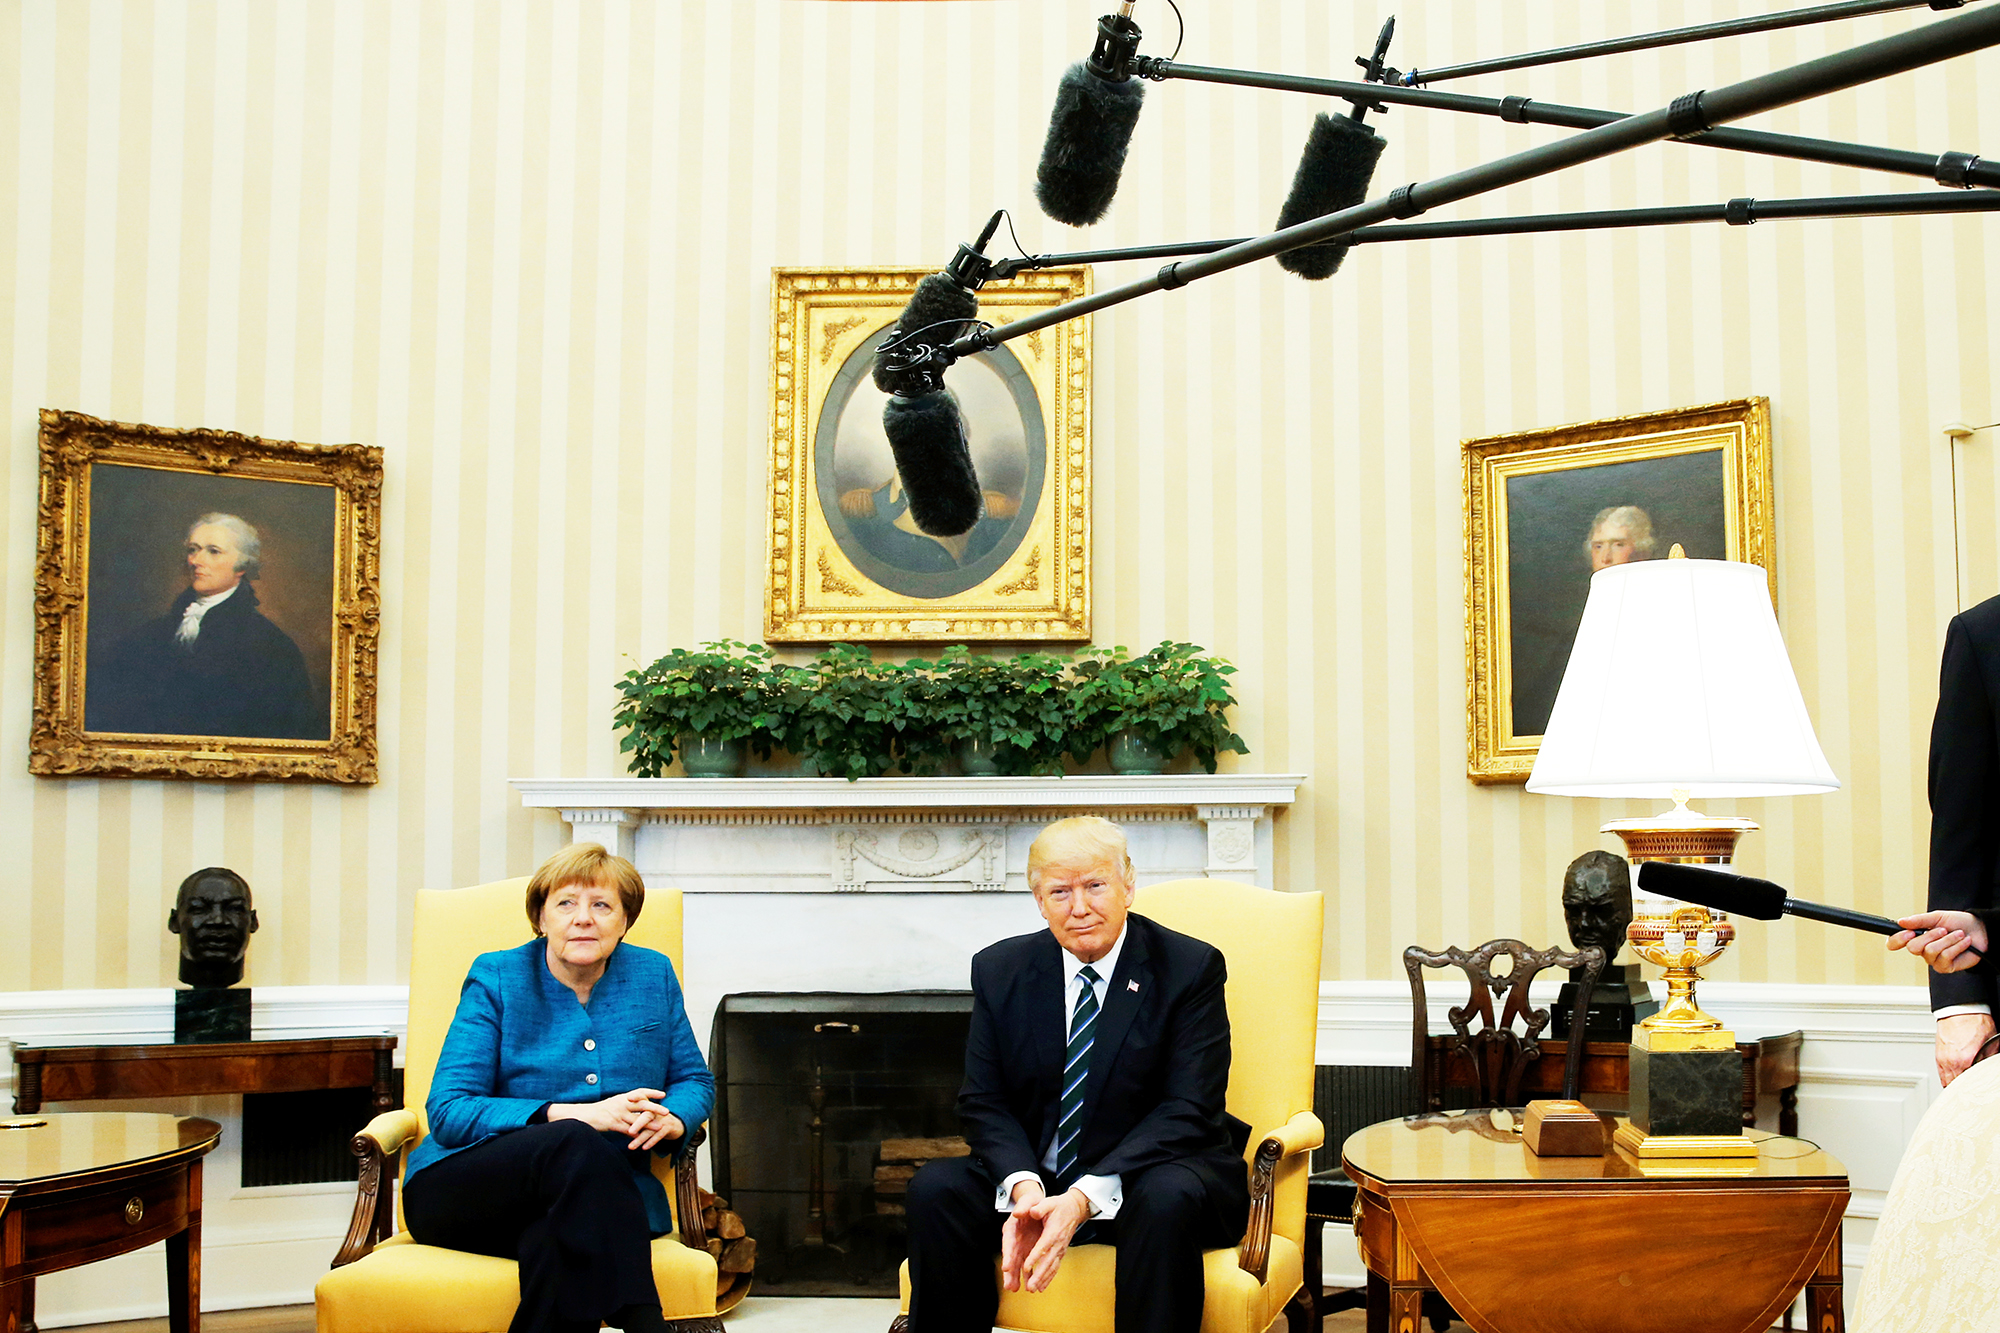 Trump meets with Merkel in the Oval Office at the White House in Washington